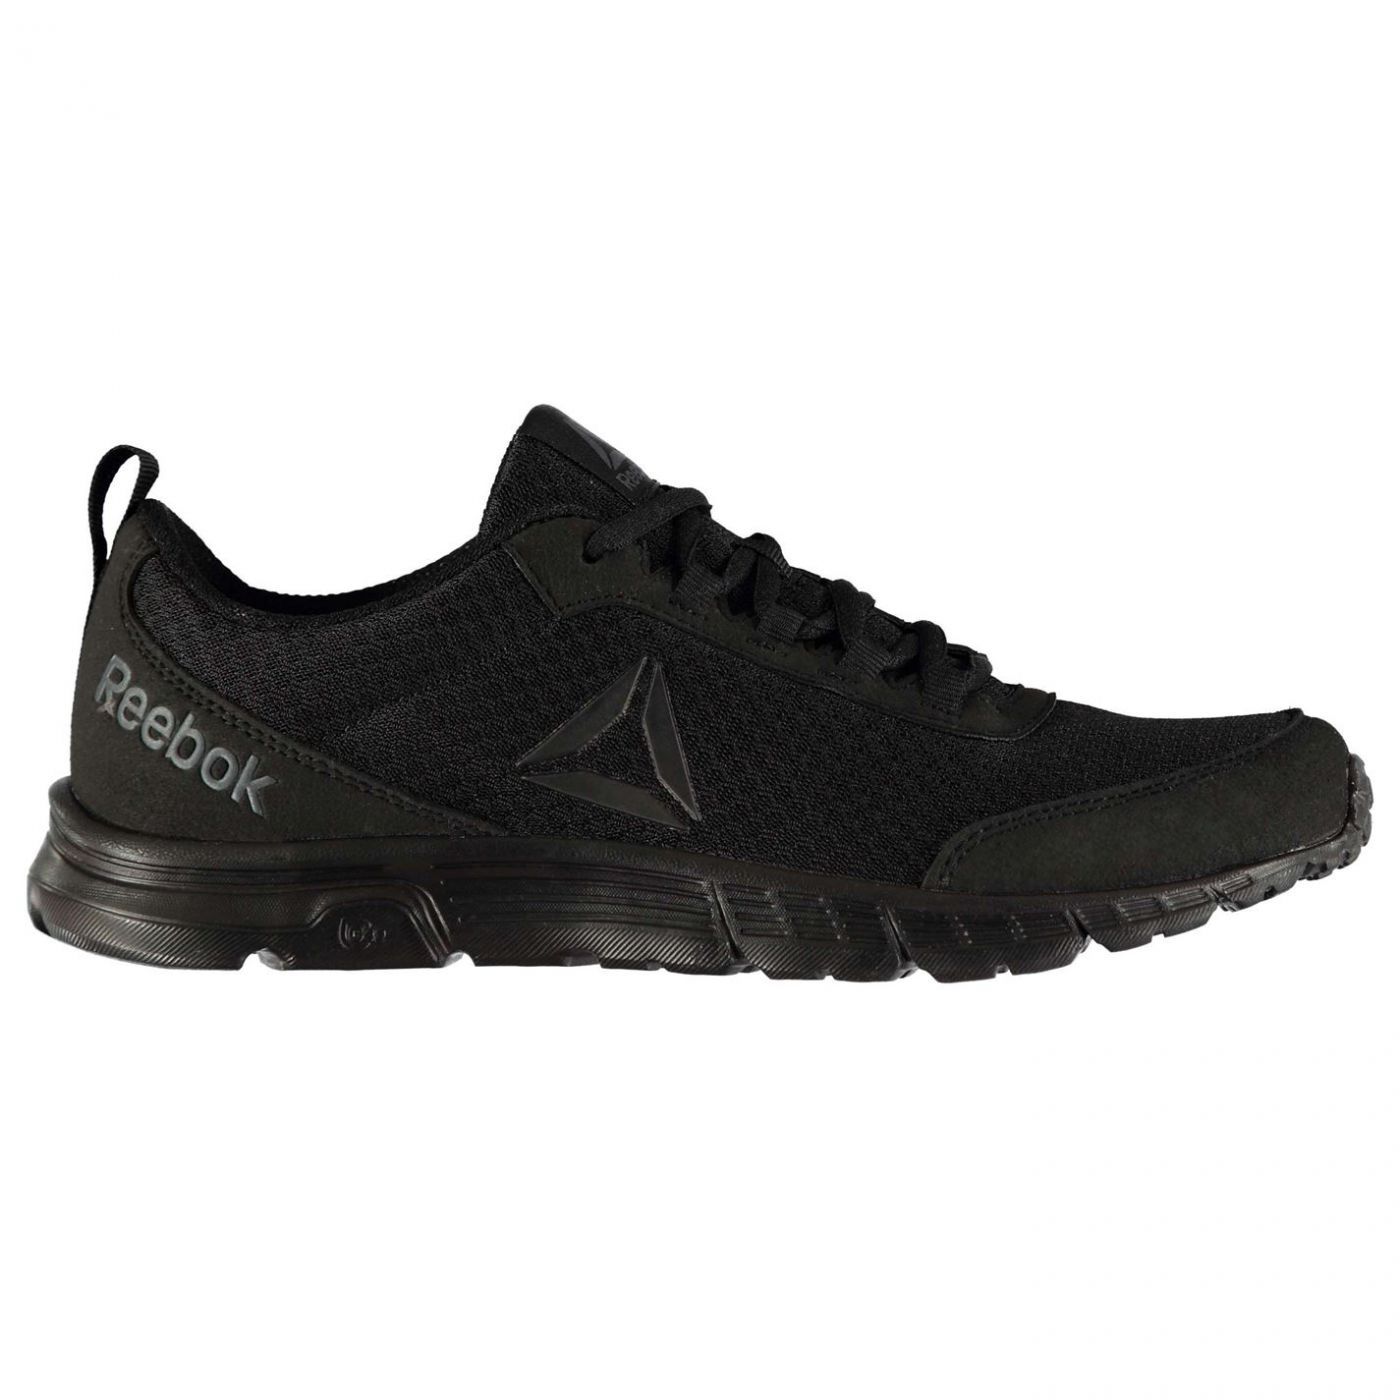 reebok quick motion mens trainers